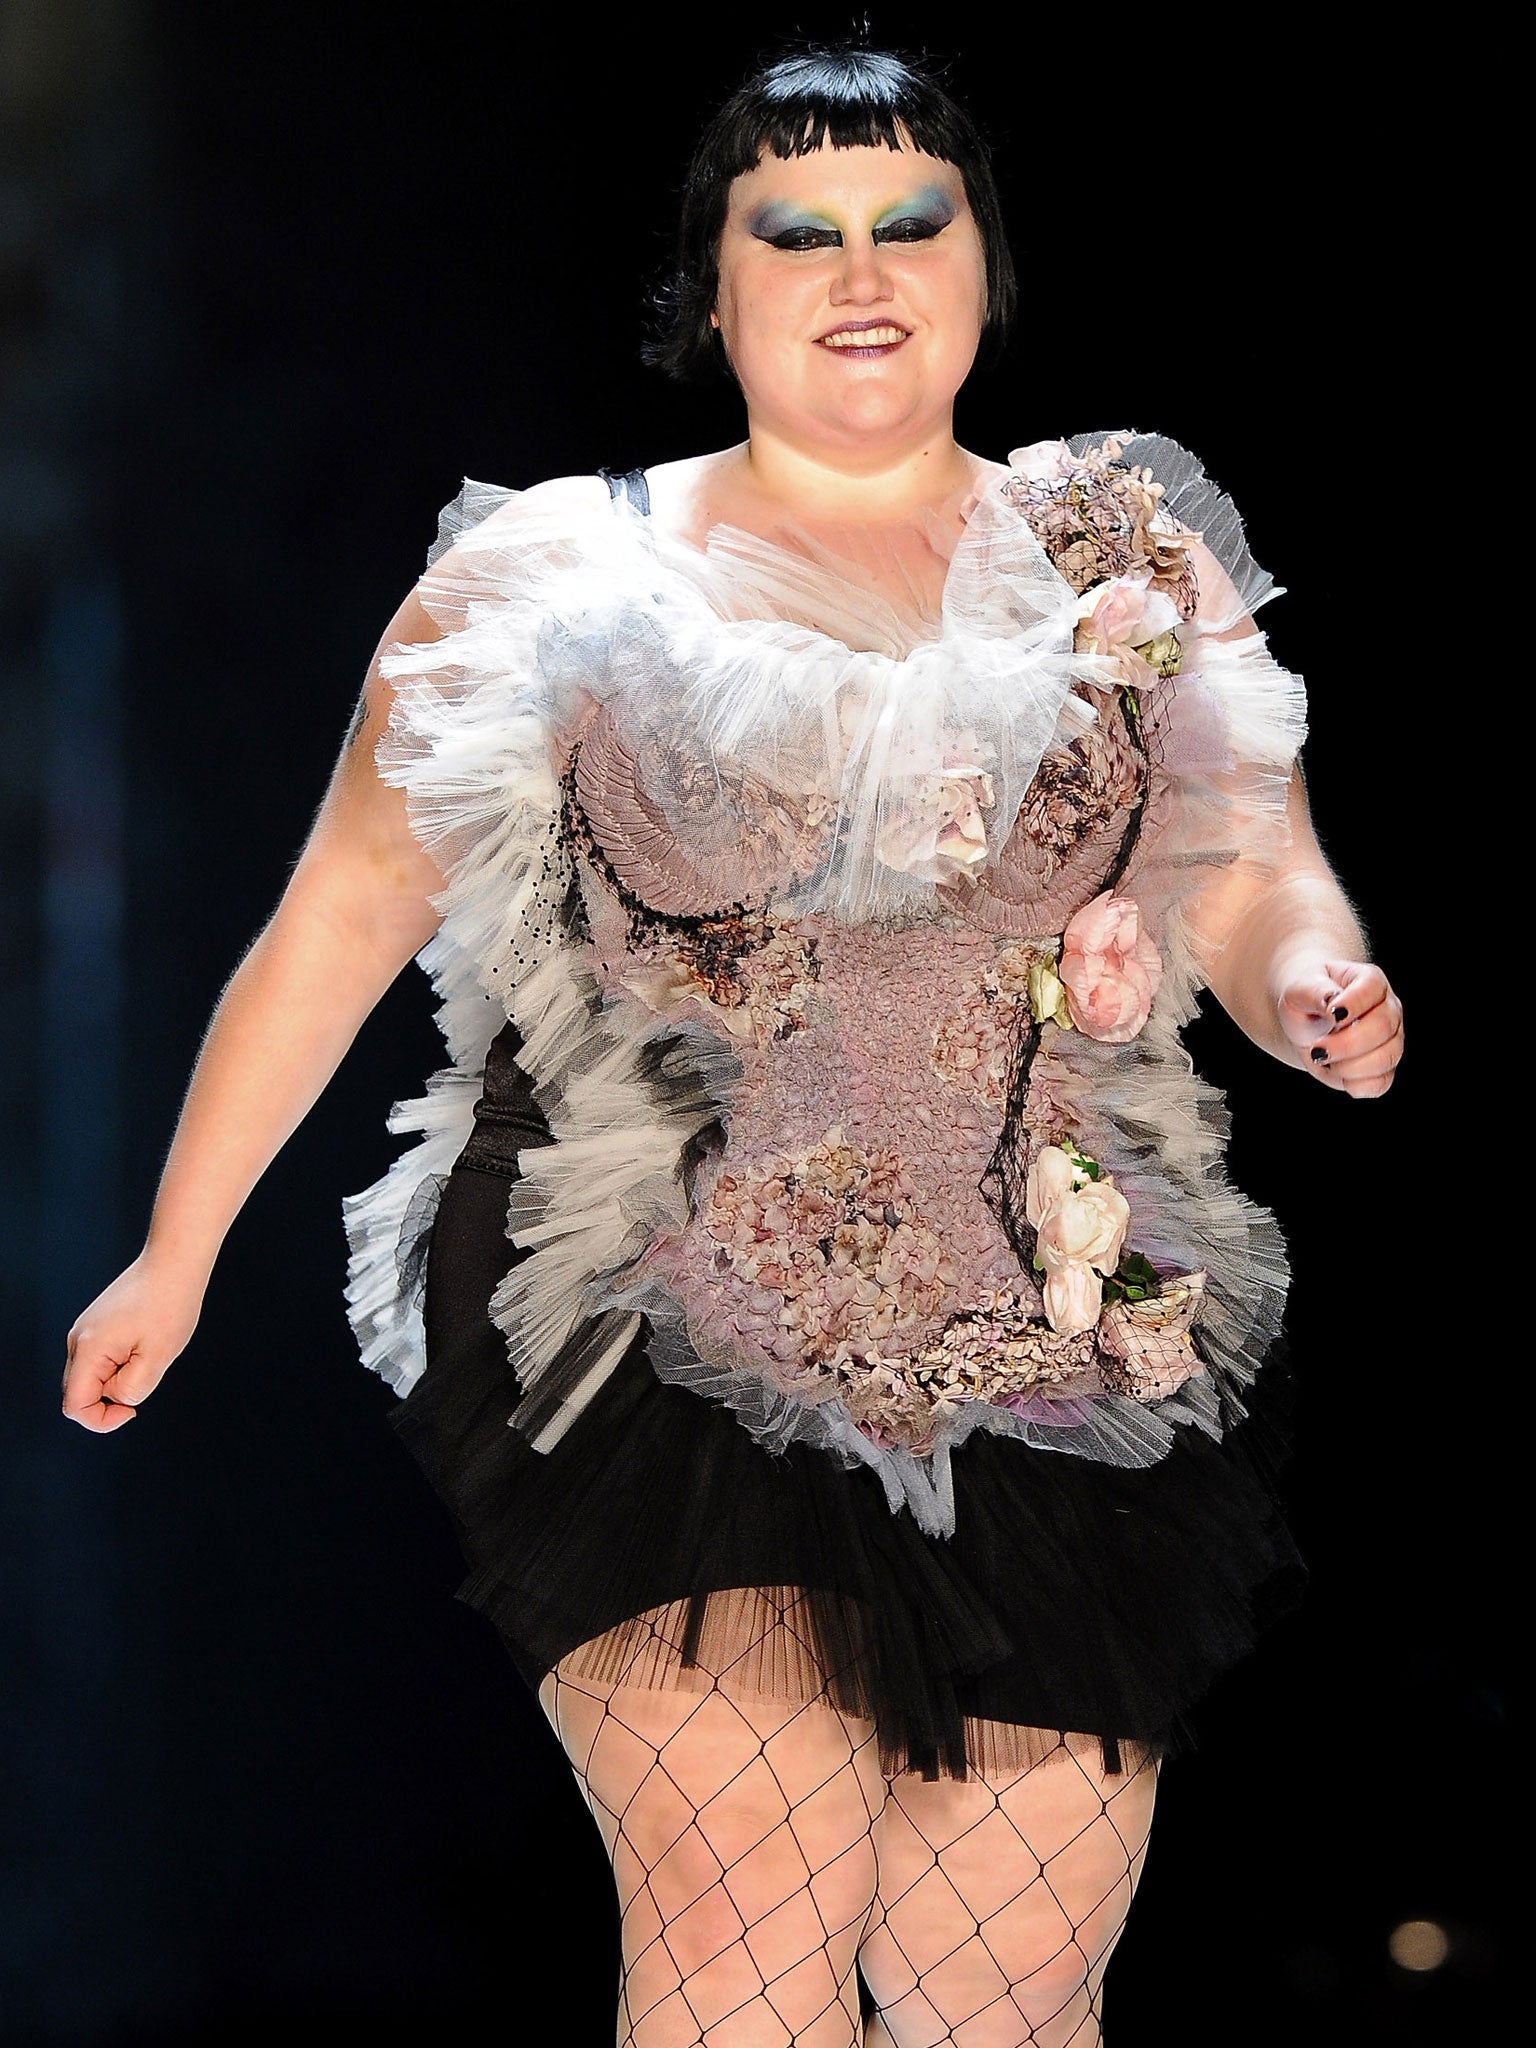 Beth Ditto models for Jean Paul Gaultier